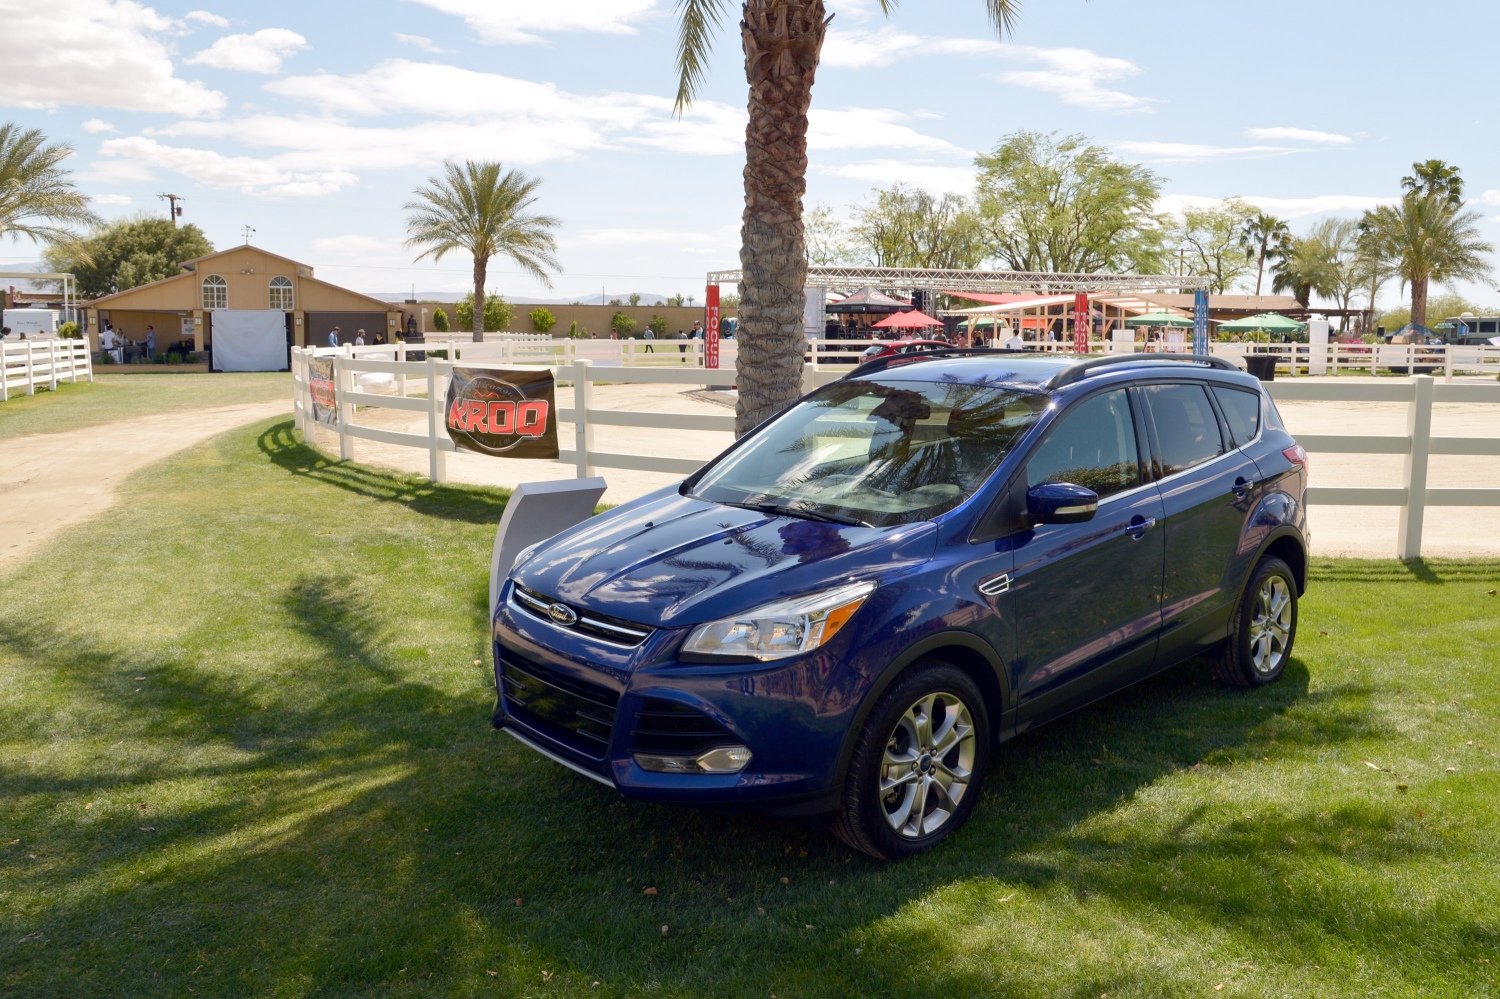 The best 10-year-old fuel-efficient SUVs like the Ford Escape